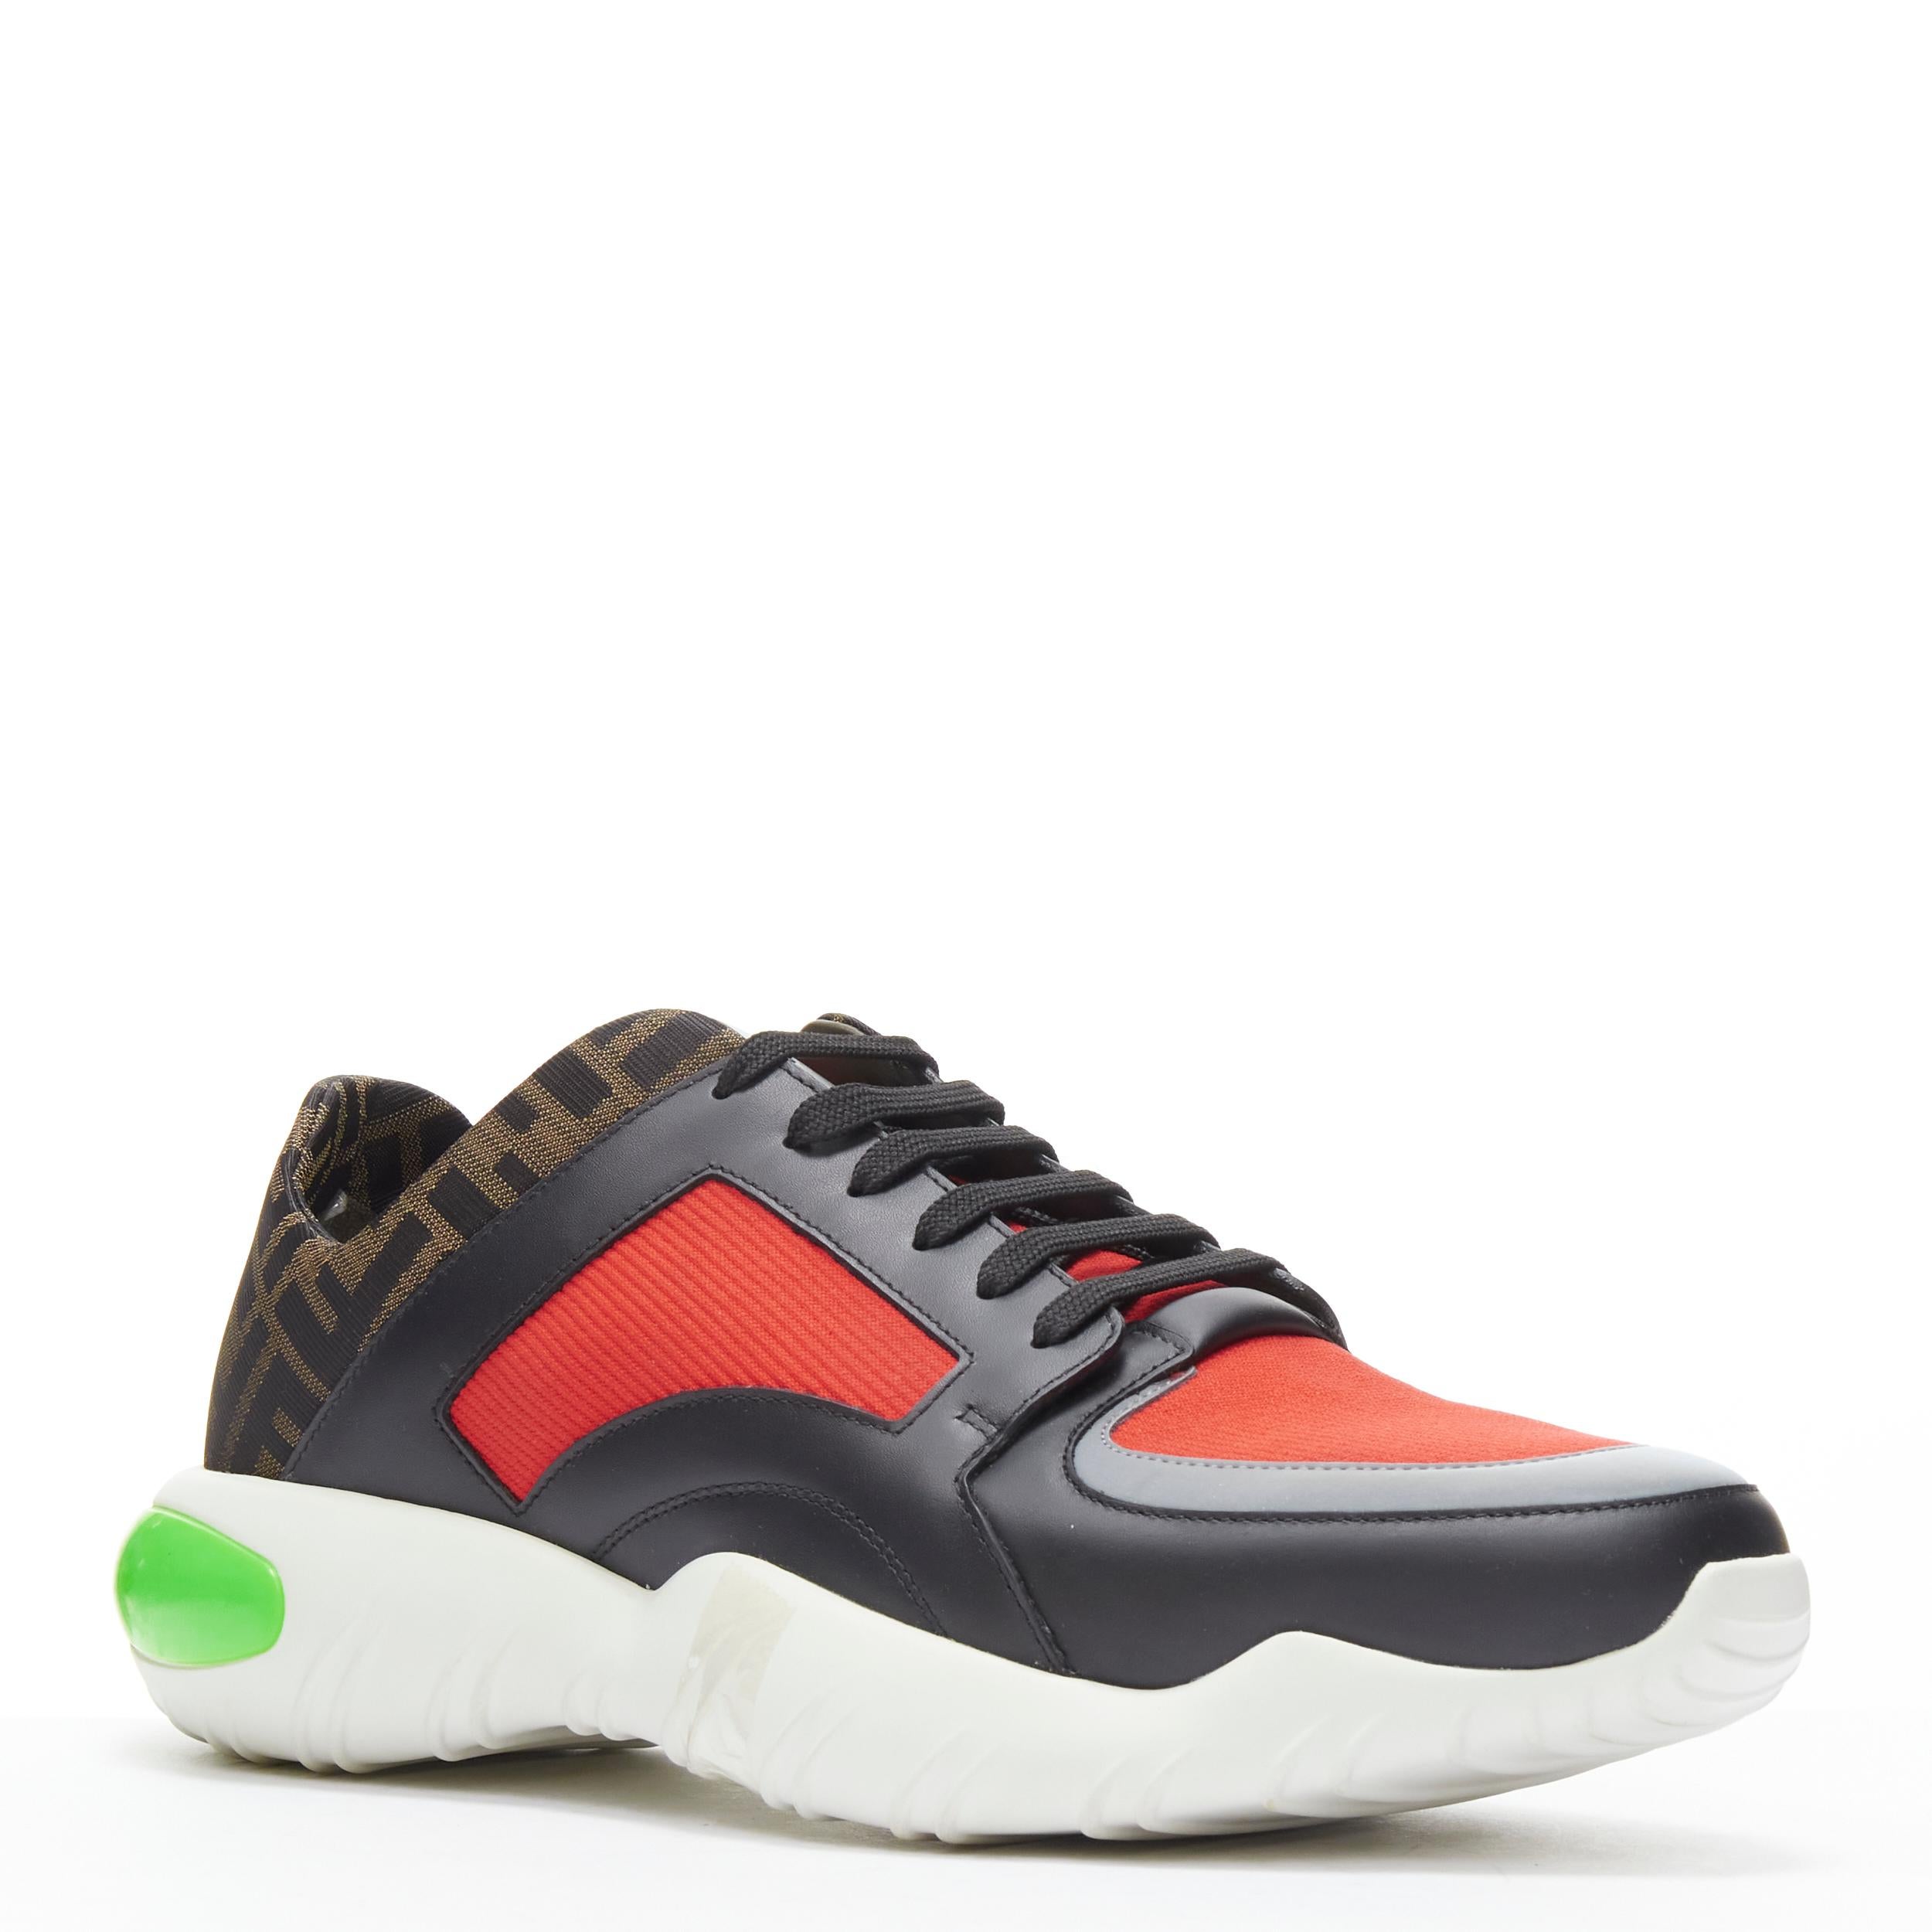 new FENDI red neon green Zucca monogram low top sneaker UK10 EU44 
Reference: TGAS/B01590 
Brand: Fendi 
Model: Zucca Tech runner 
Material: Fabric 
Color: Red 
Pattern: Solid 
Closure: Lace Up 
Extra Detail: Reflective detailing at toe box and on